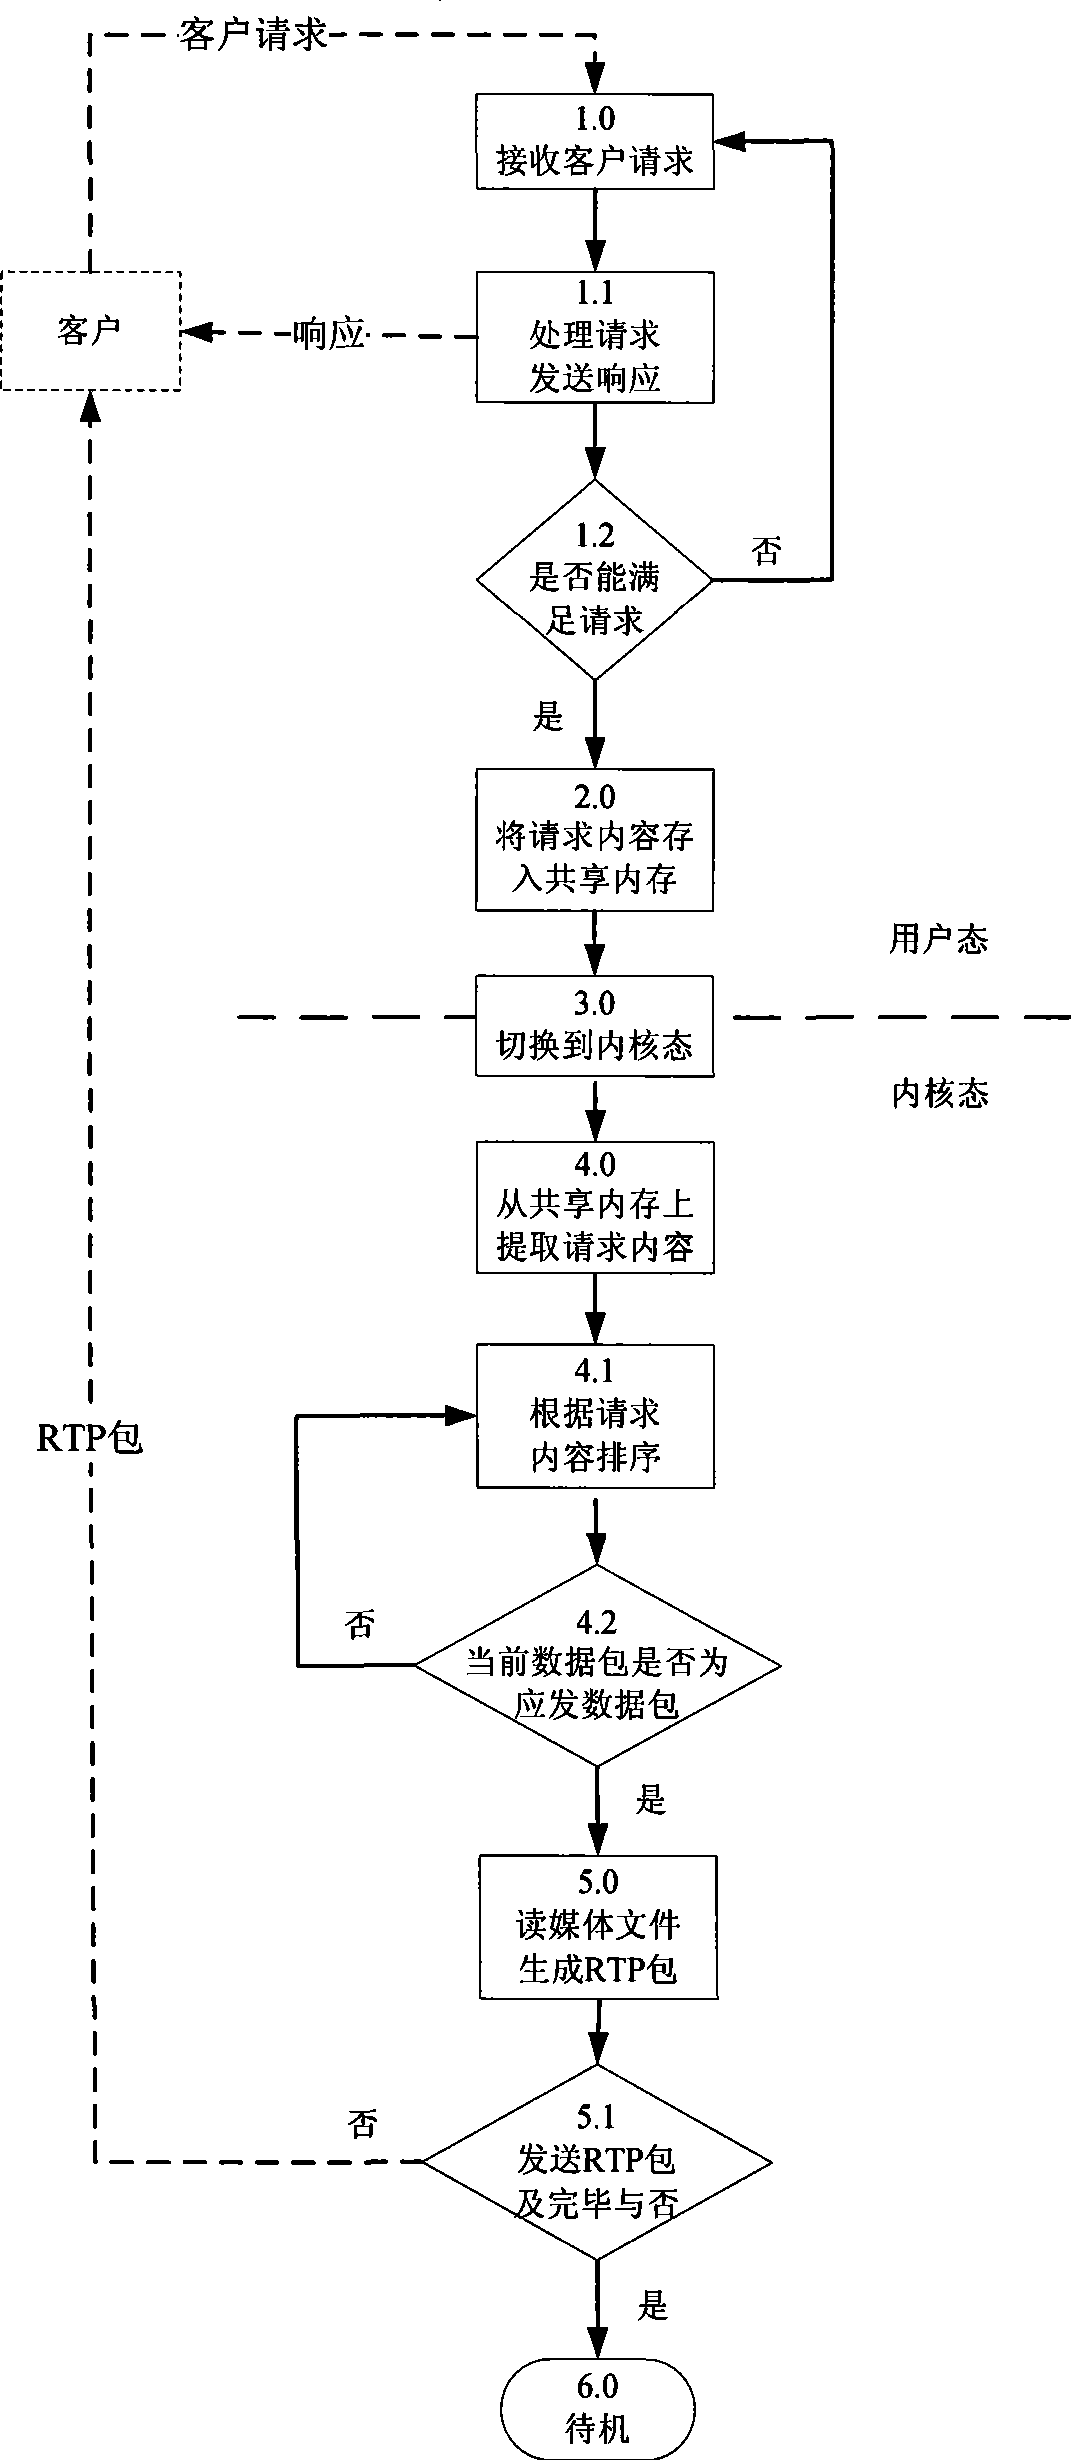 Operation method for memory sharing media server and functional module construction